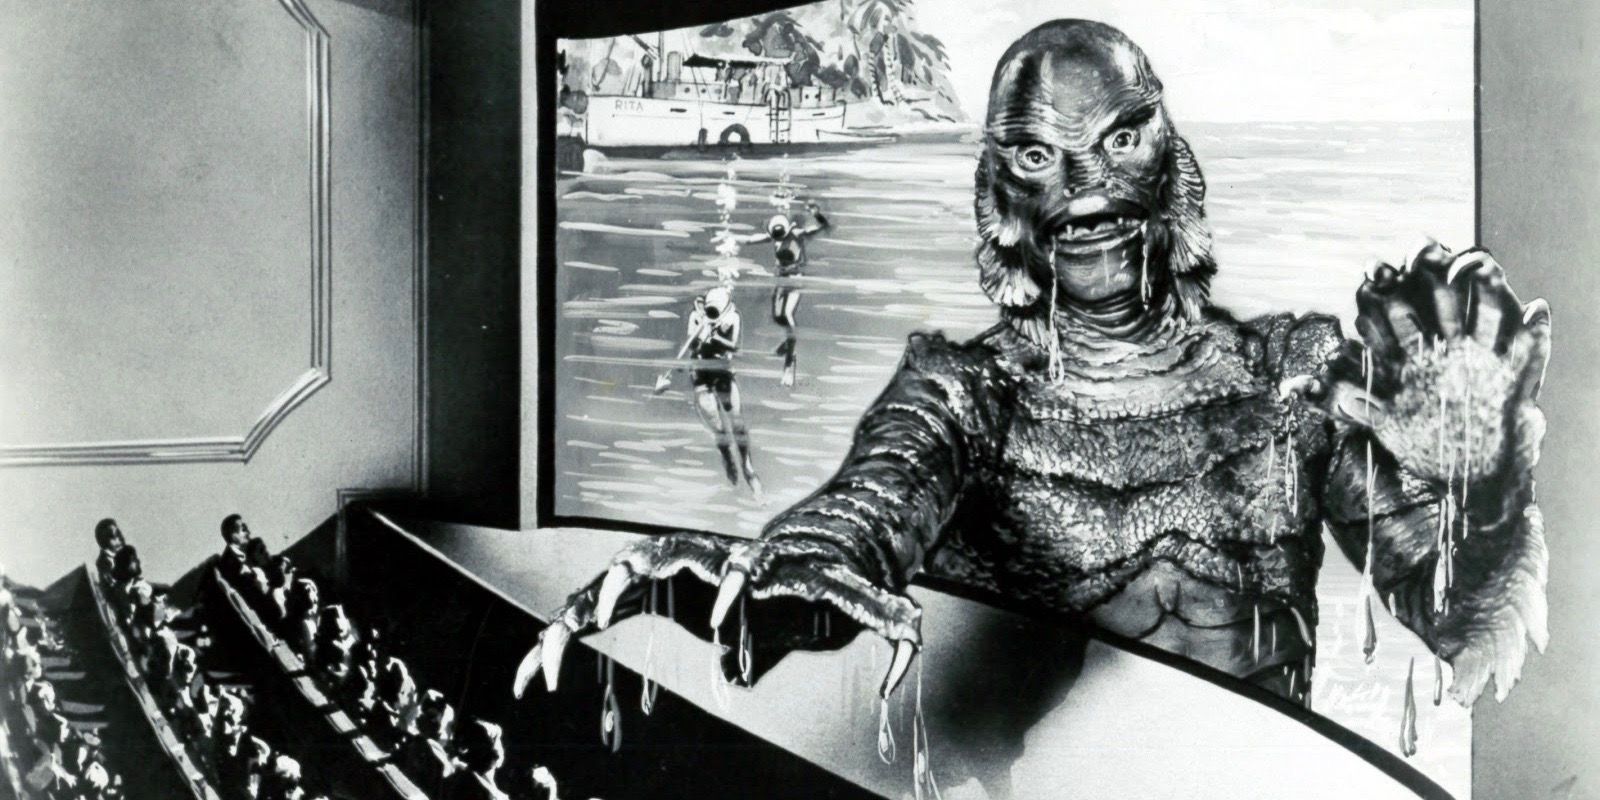 The Creature From the Black Lagoon 3D